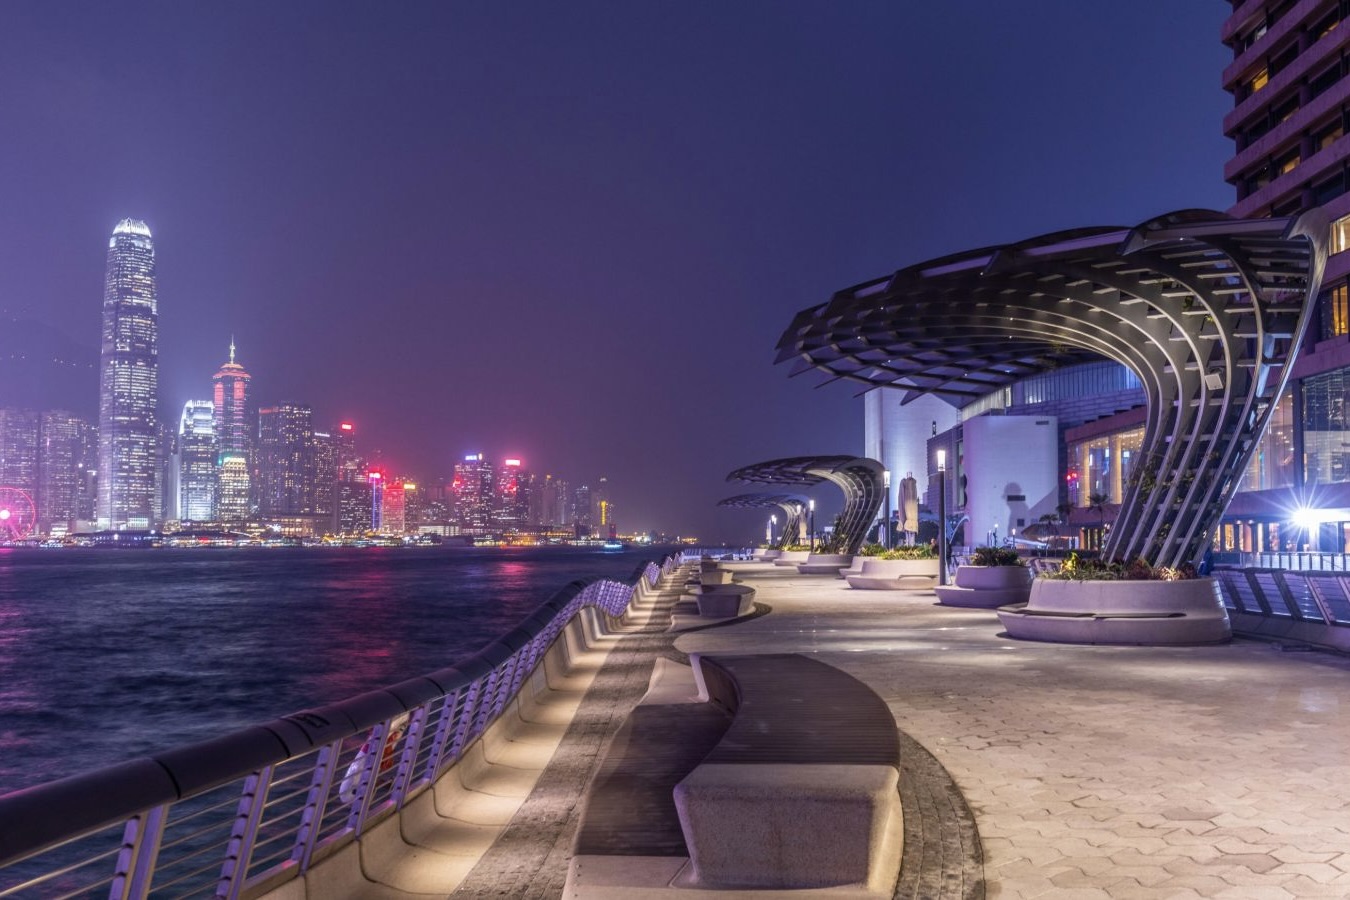 a view of the avenue of stars in hong kong. the promenade is on the right and victoria harbour is on the left, with a view of hong kong island in the background.